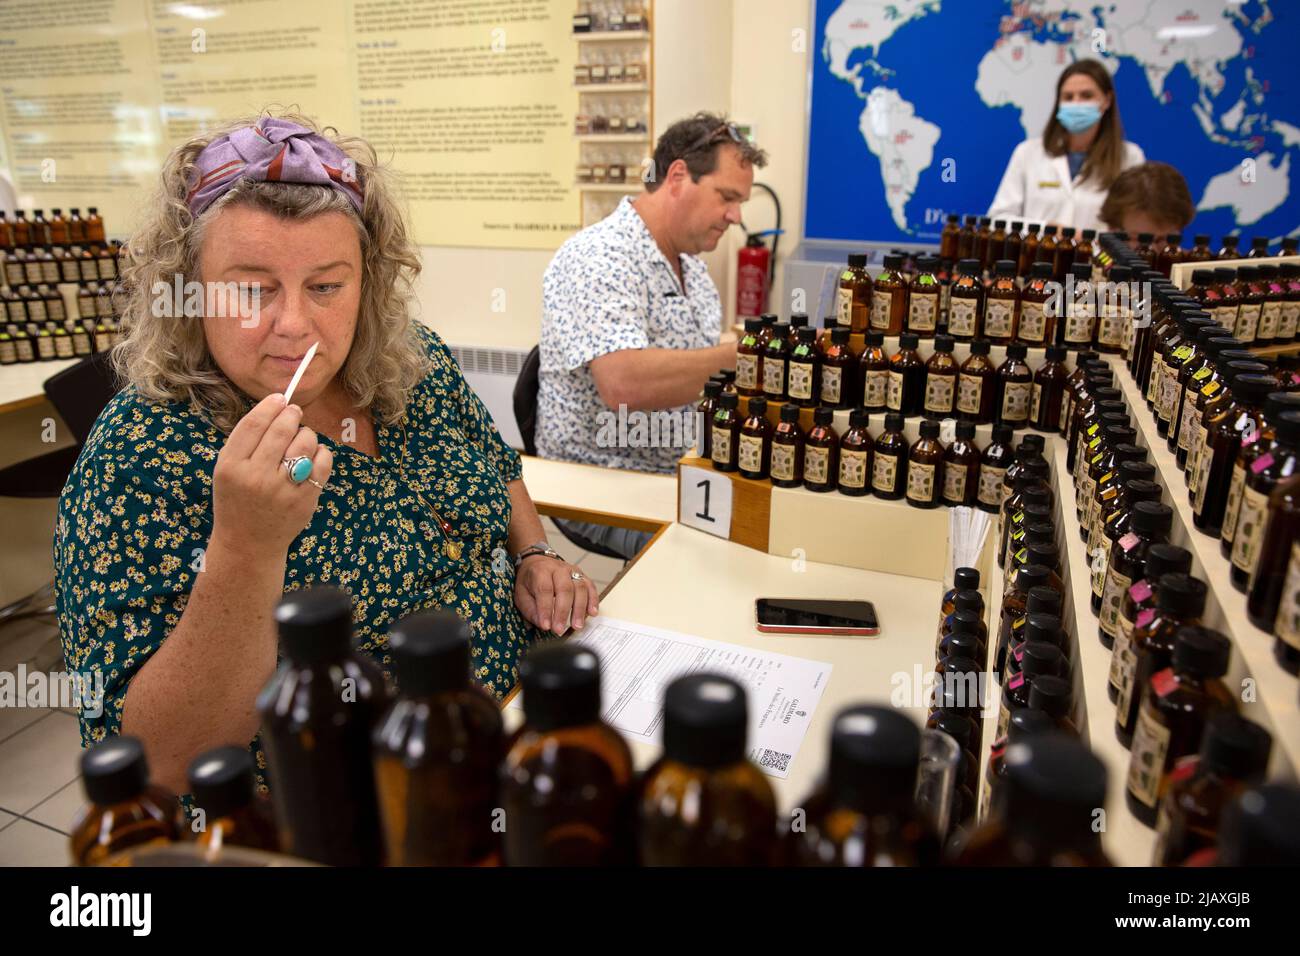 Mariska Lokker (L), 49, and her husband Paul Lokker (R), 45, both tourists from the Netherlands, creating their own fragrance during a workshop at the Galimard Studio des Fragrances in Grasse, France on September 10, 2021. Grasse has had a prospering perfume industry since the end of the 18th century and is considered the world's capital of perfume. There are numerous of old 'parfumeries' in Grasse, such as Galimard, Molinard and Fragonard, each with tours and a museum. Many 'noses' ('Les nez' in French) are trained or have spent time in Grasse to distinguish over 2,000 kinds of scent. Grasse Stock Photo